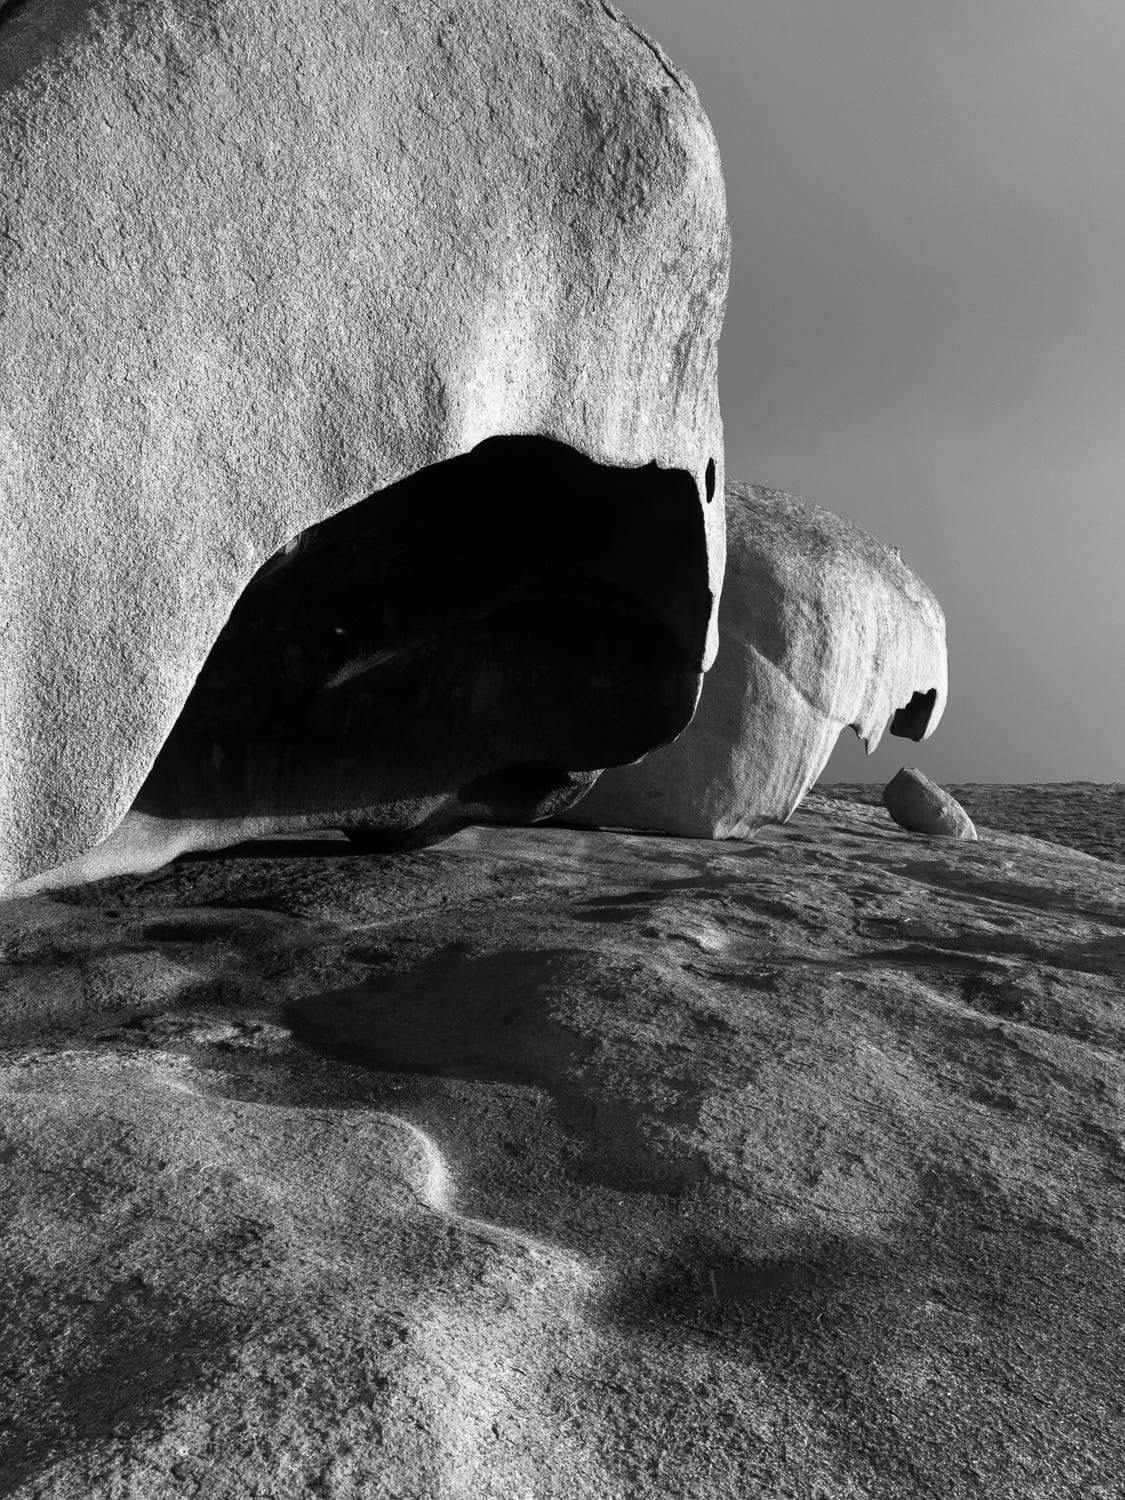 A black and white view of rocks with an opening tunnel face, Remarkable Rocks #2 - Kangaroo Island SA